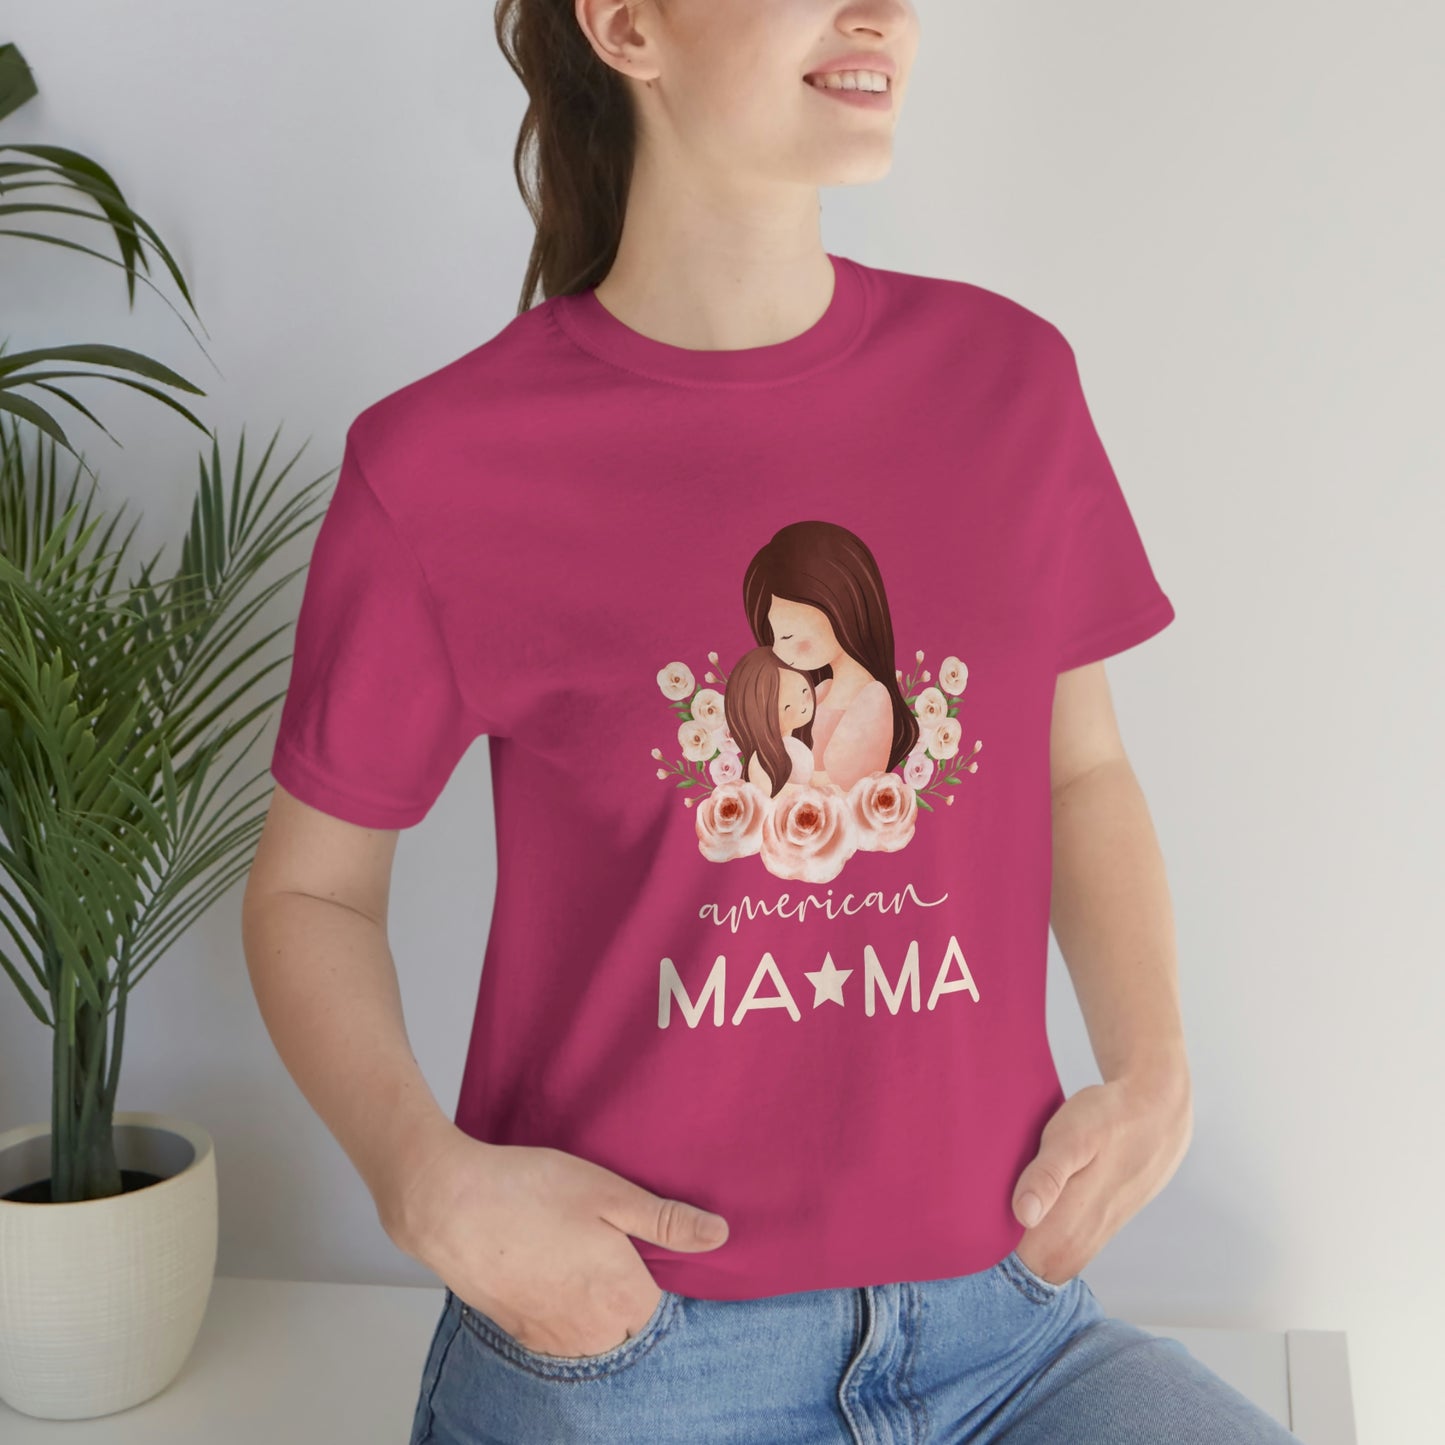 Get ready to make a statement with our American Mom berry colored jersey short sleeve t-shirt. A perfect Mother's Day gift for any mom. Celebrate her with this unique and stylish t-shirt.